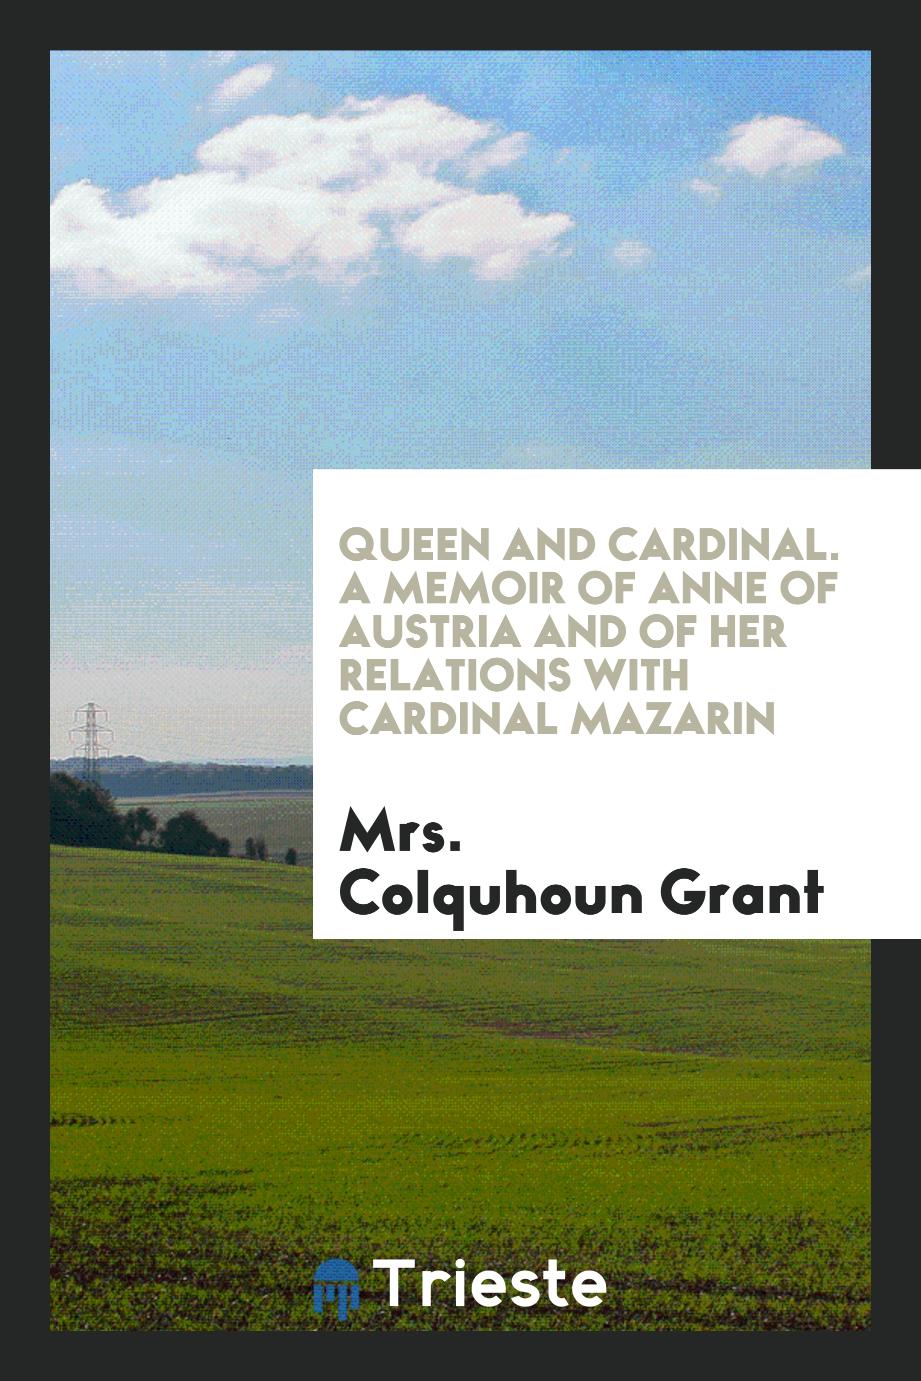 Queen and Cardinal. A Memoir of Anne of Austria and of Her Relations with Cardinal Mazarin